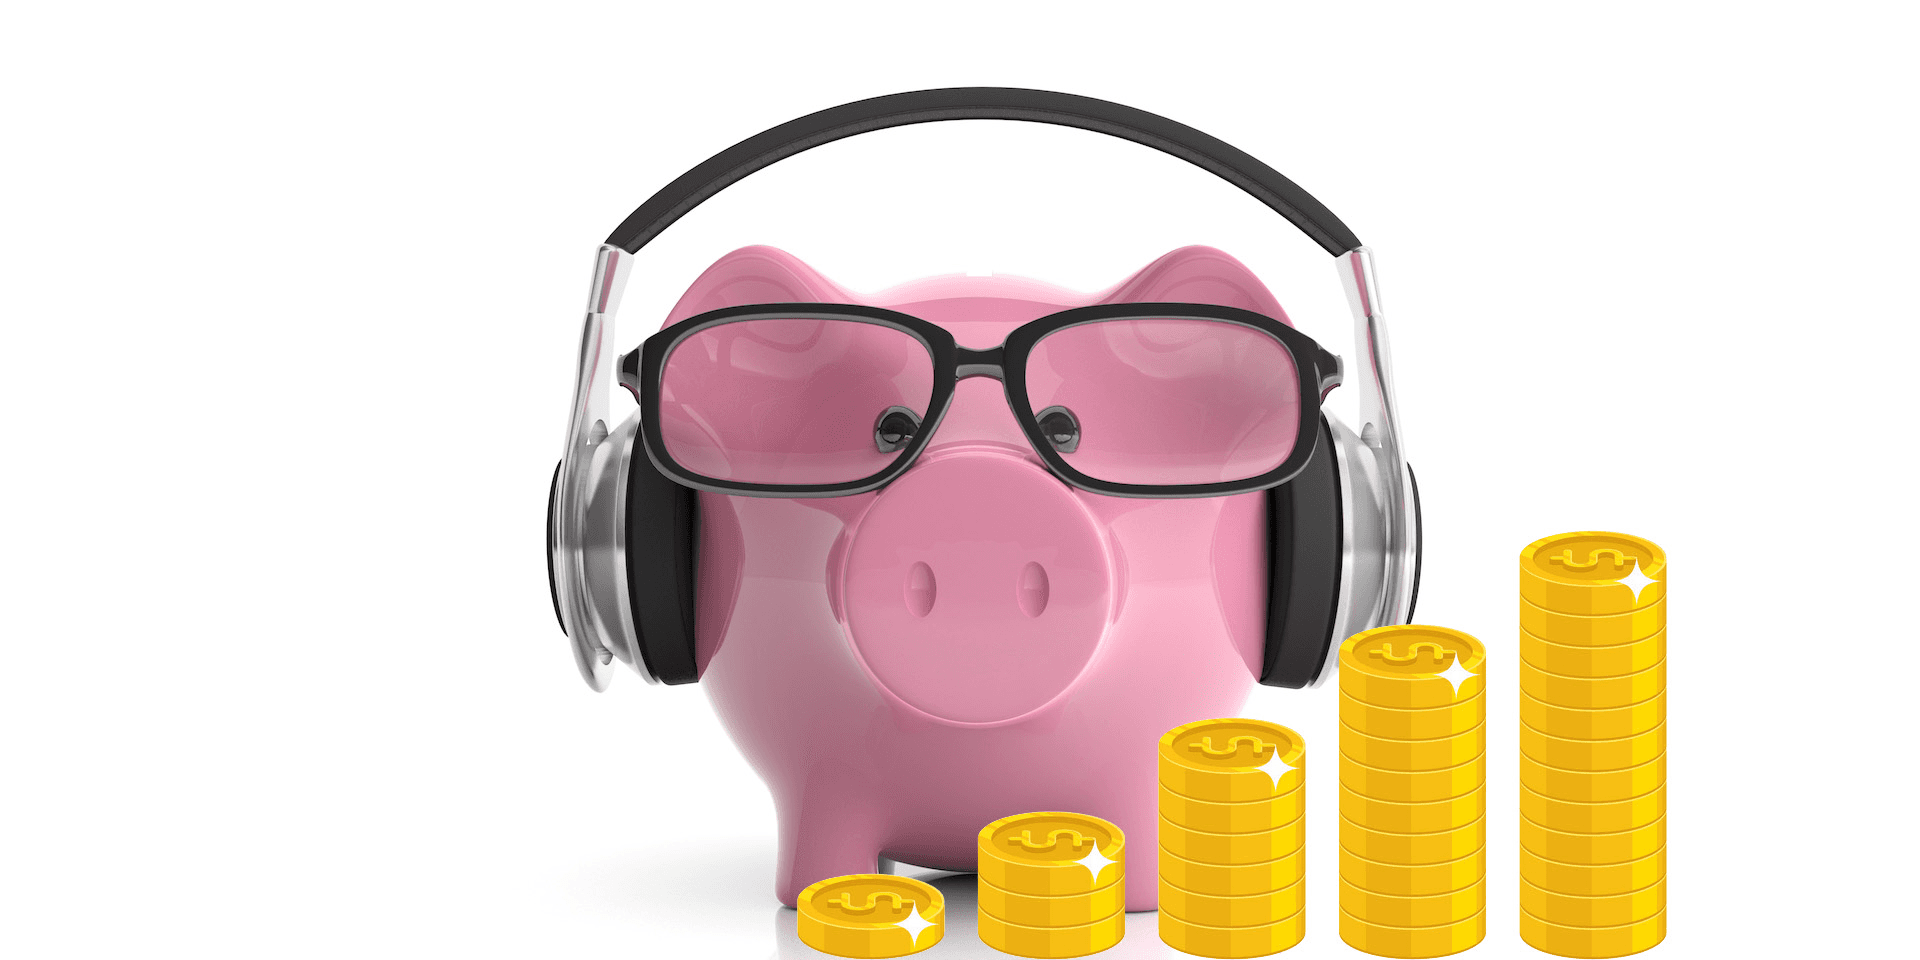 Breaking news: with alternative music streaming services, you can save up to 80%!